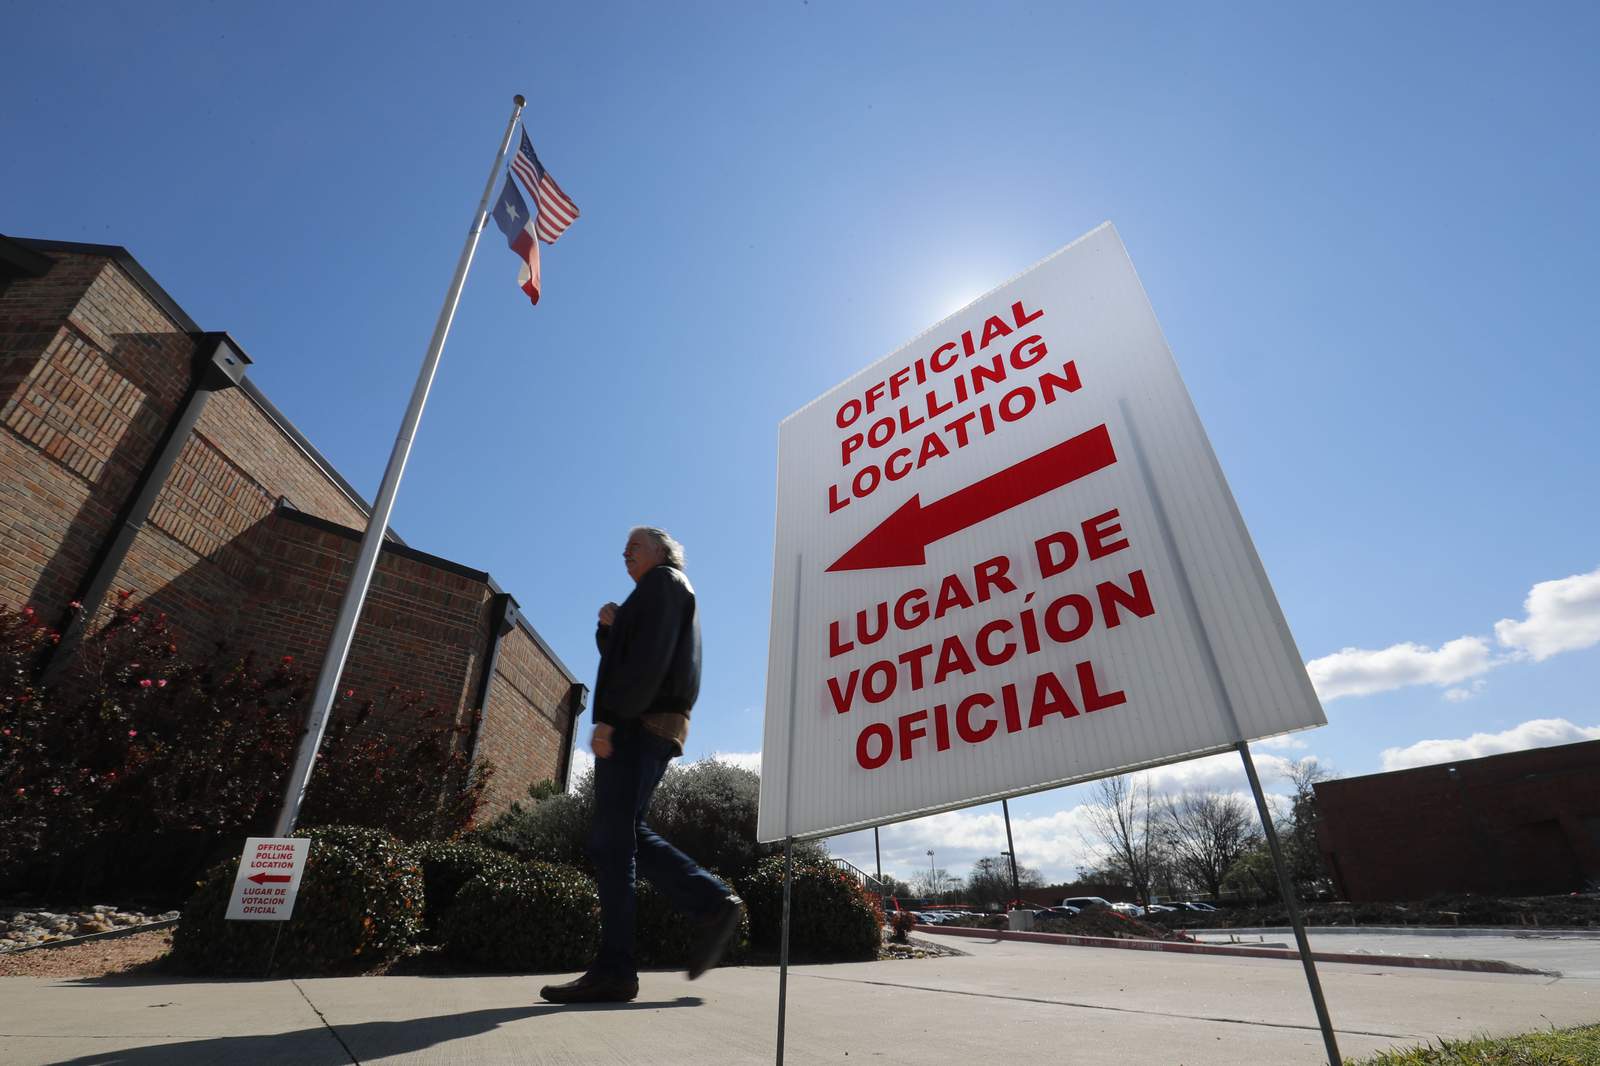 Wanted: Bilingual poll workers who reflect U.S. diversity